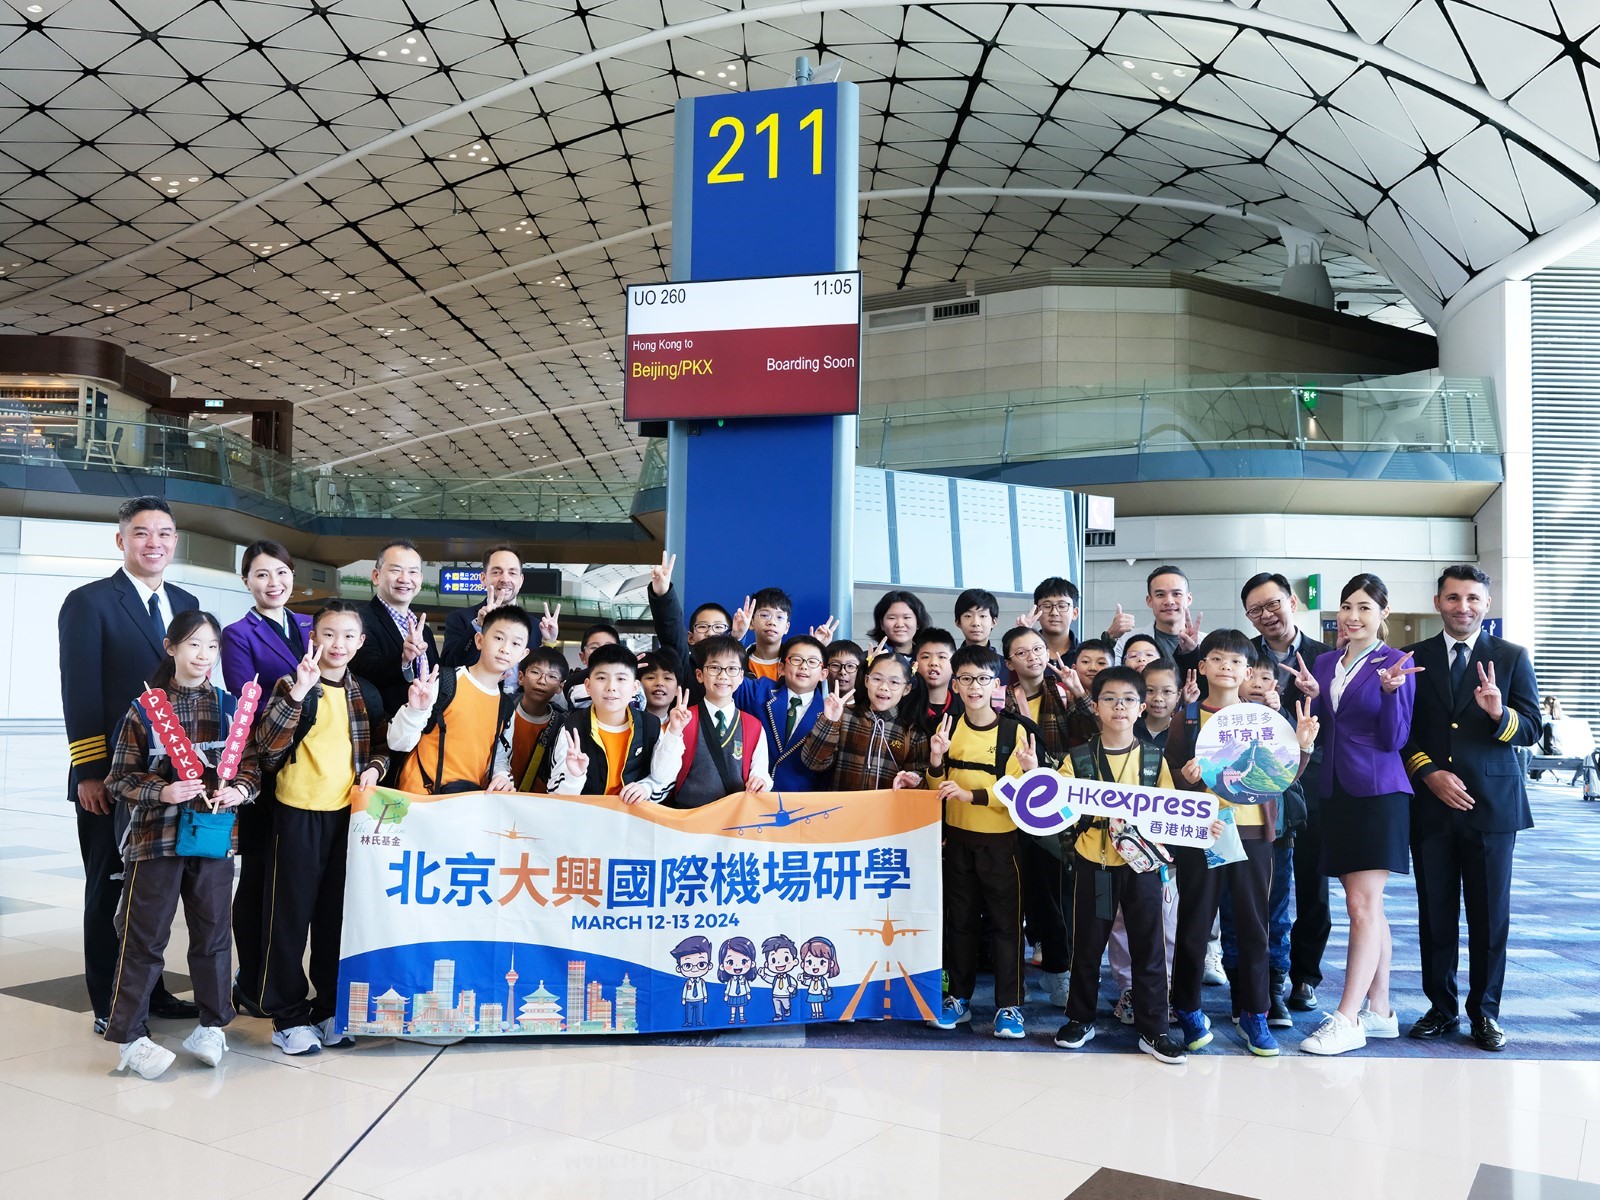 HK Express is thrilled to announce the inauguration of a new route between Hong Kong and Beijing Daxing International